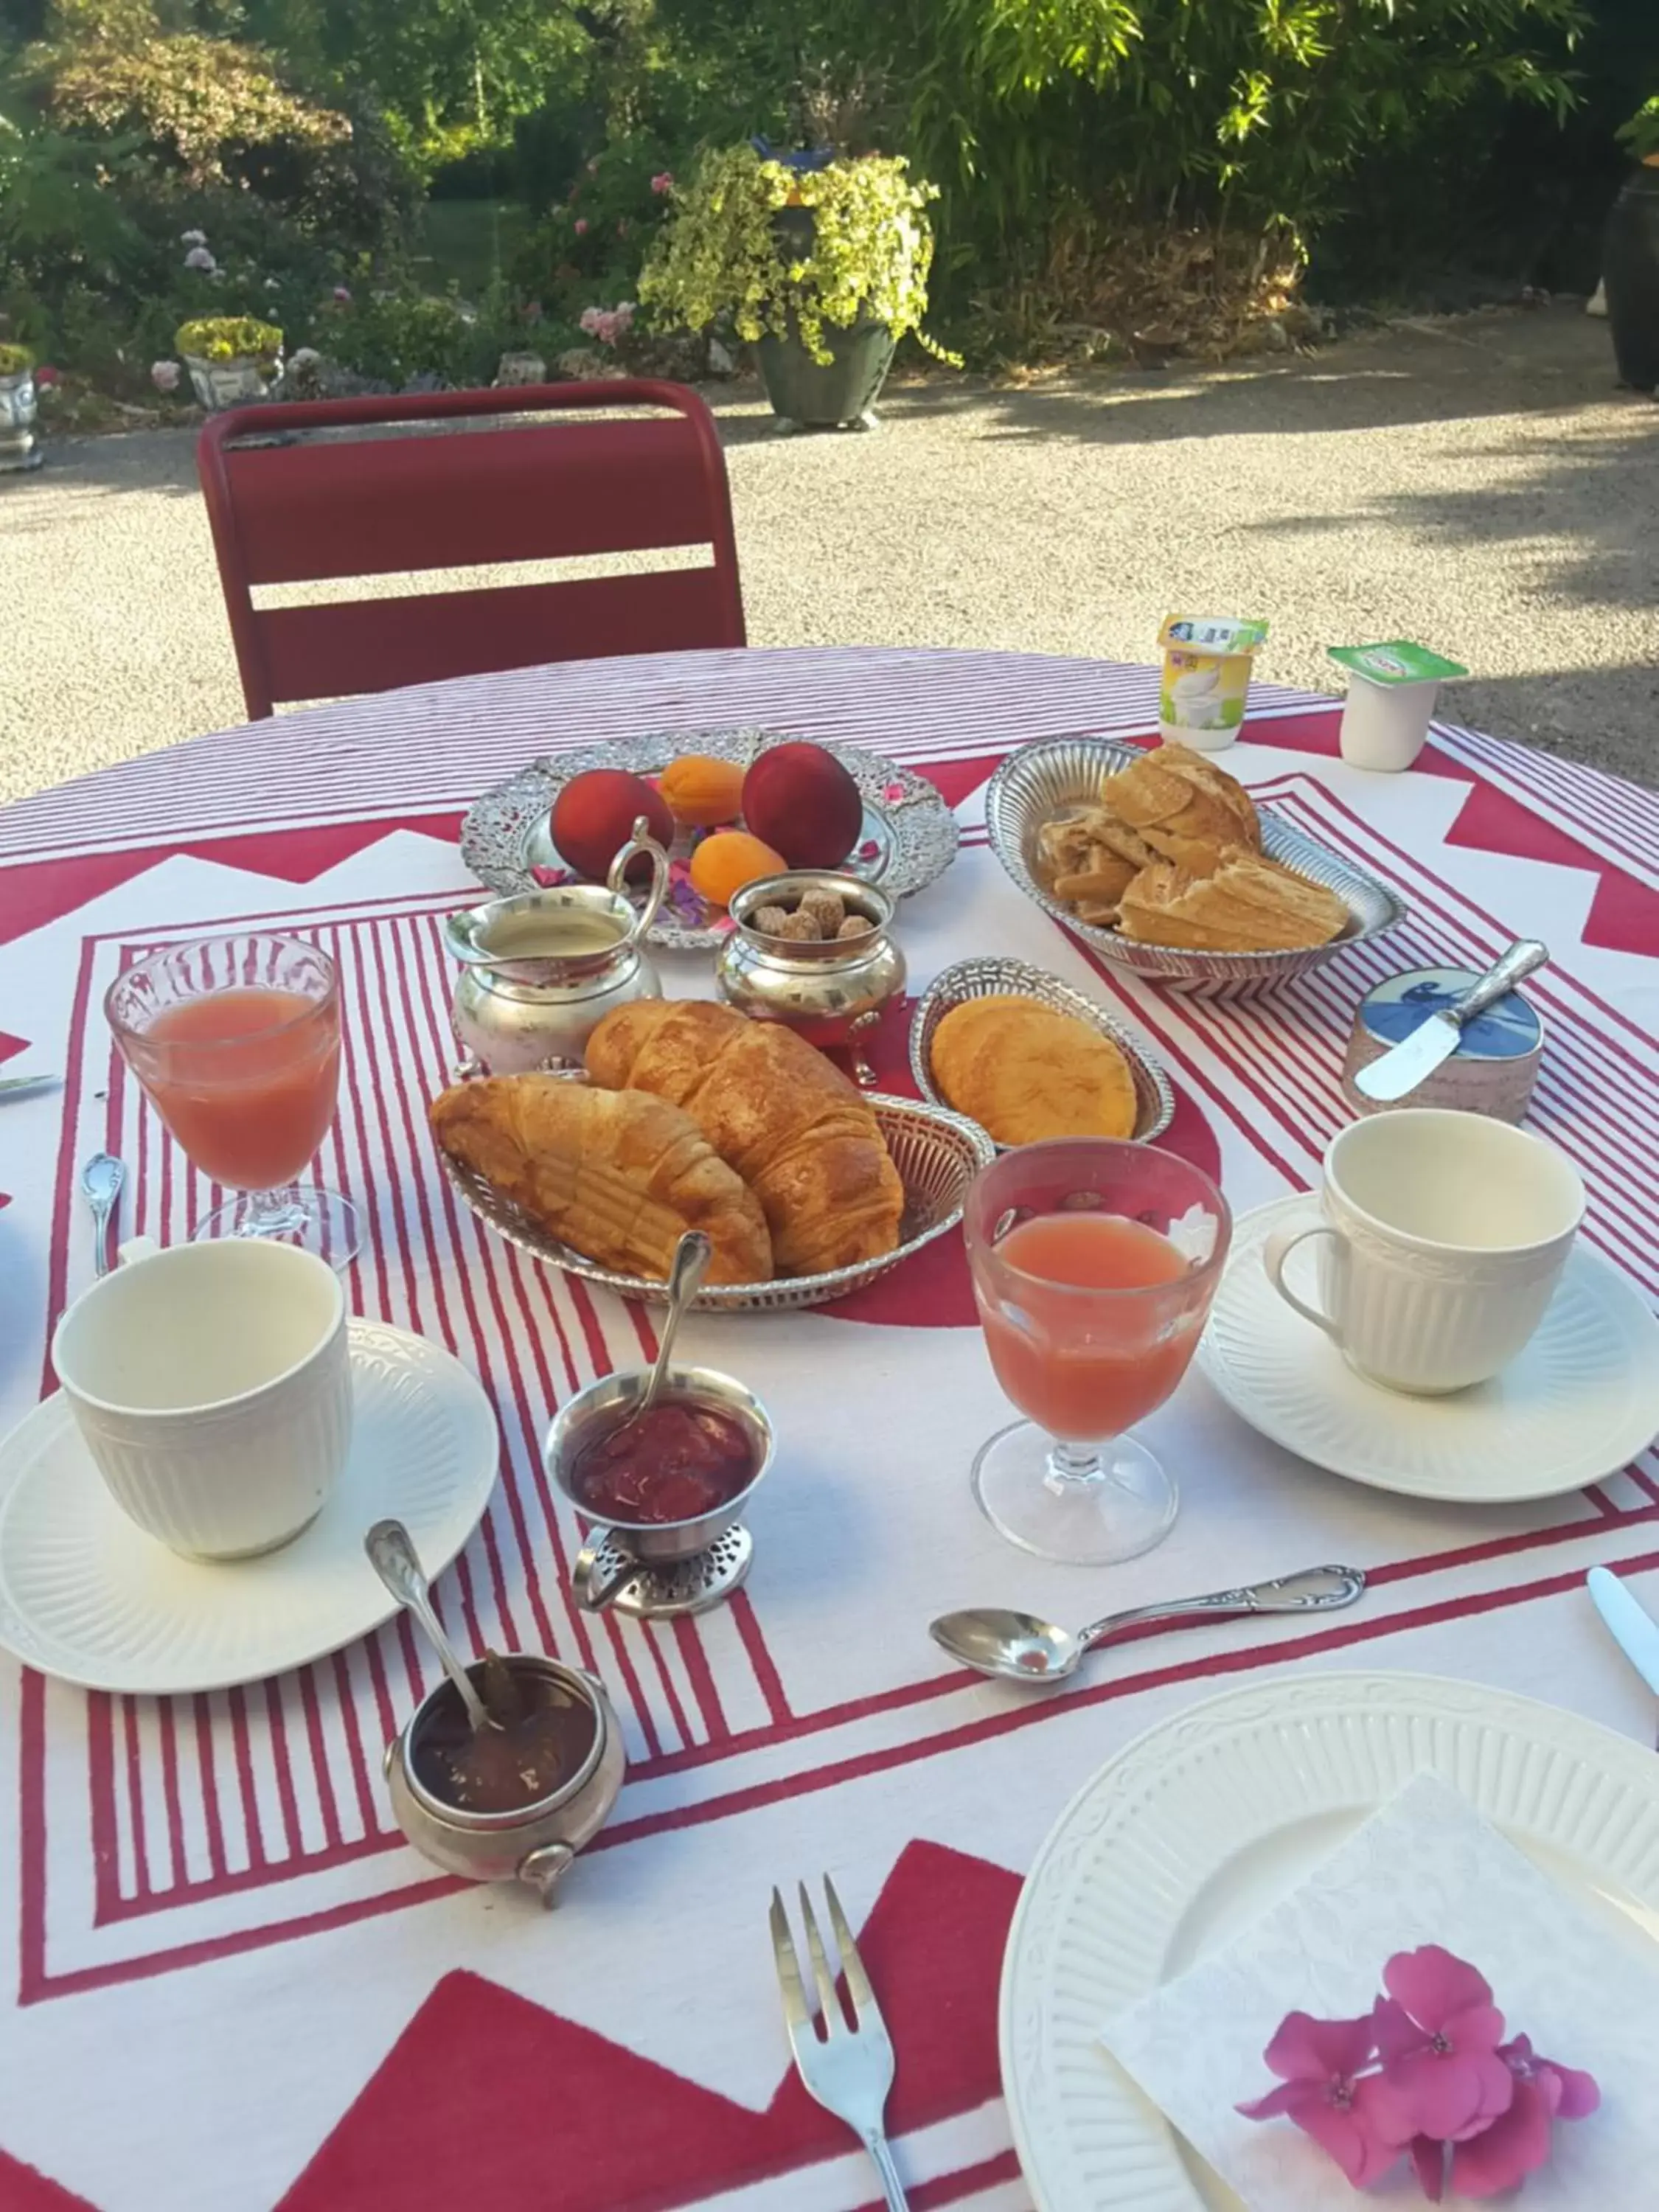 Food and drinks, Breakfast in La Maison des Thermes, Chambre d'hôte